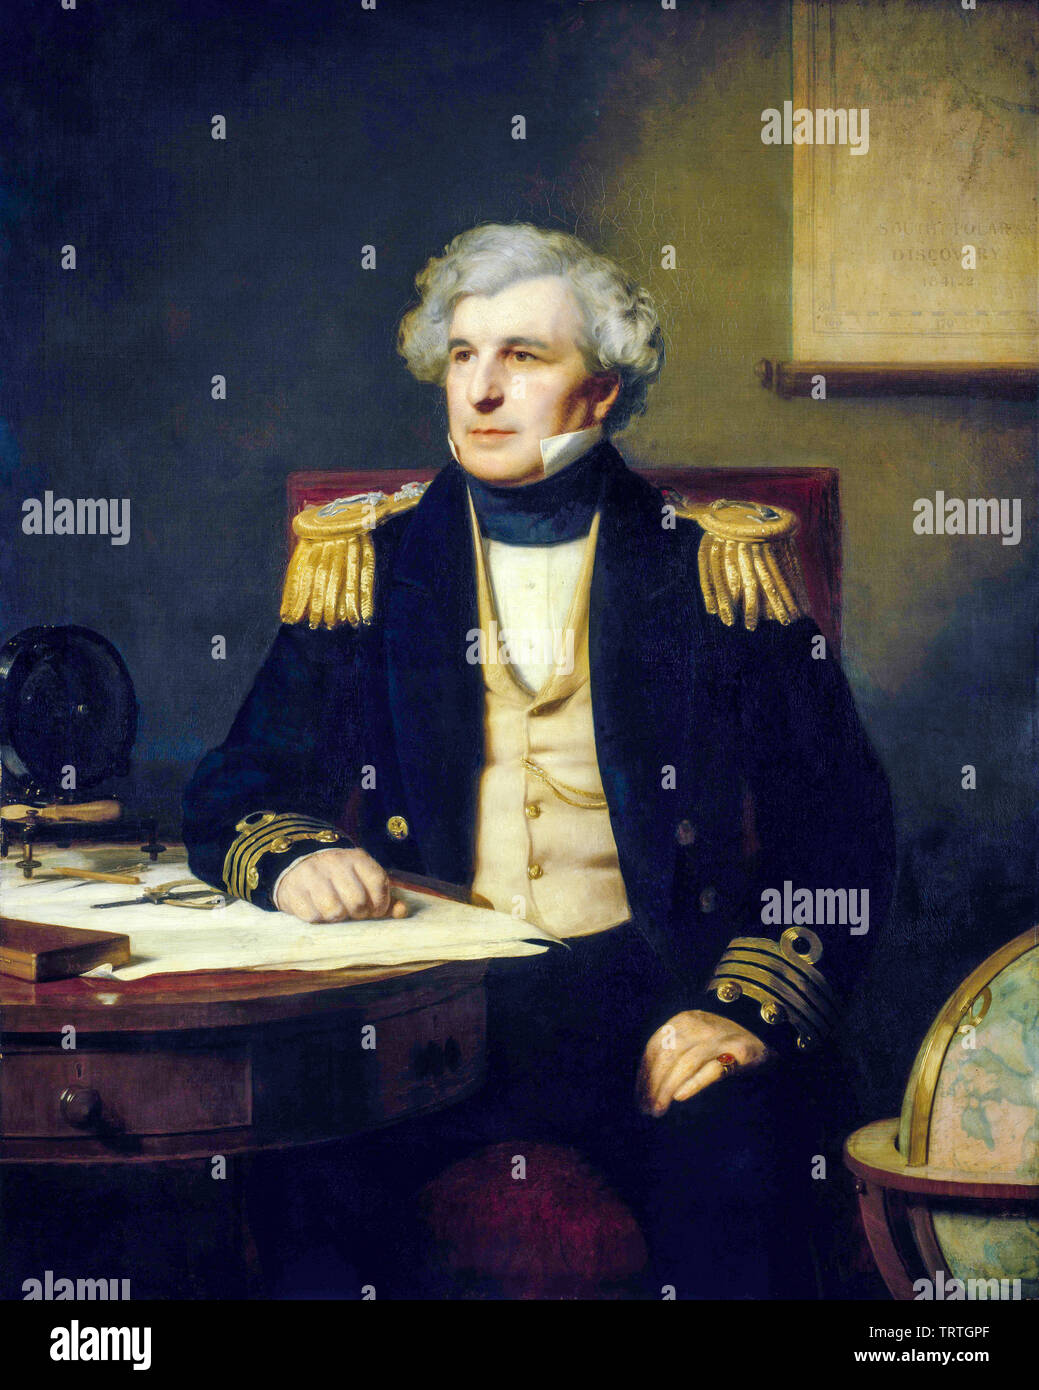 Captain Sir James Clark Ross, 1800-1862, portrait painting by Stephen Pearce, 1871 Stock Photo